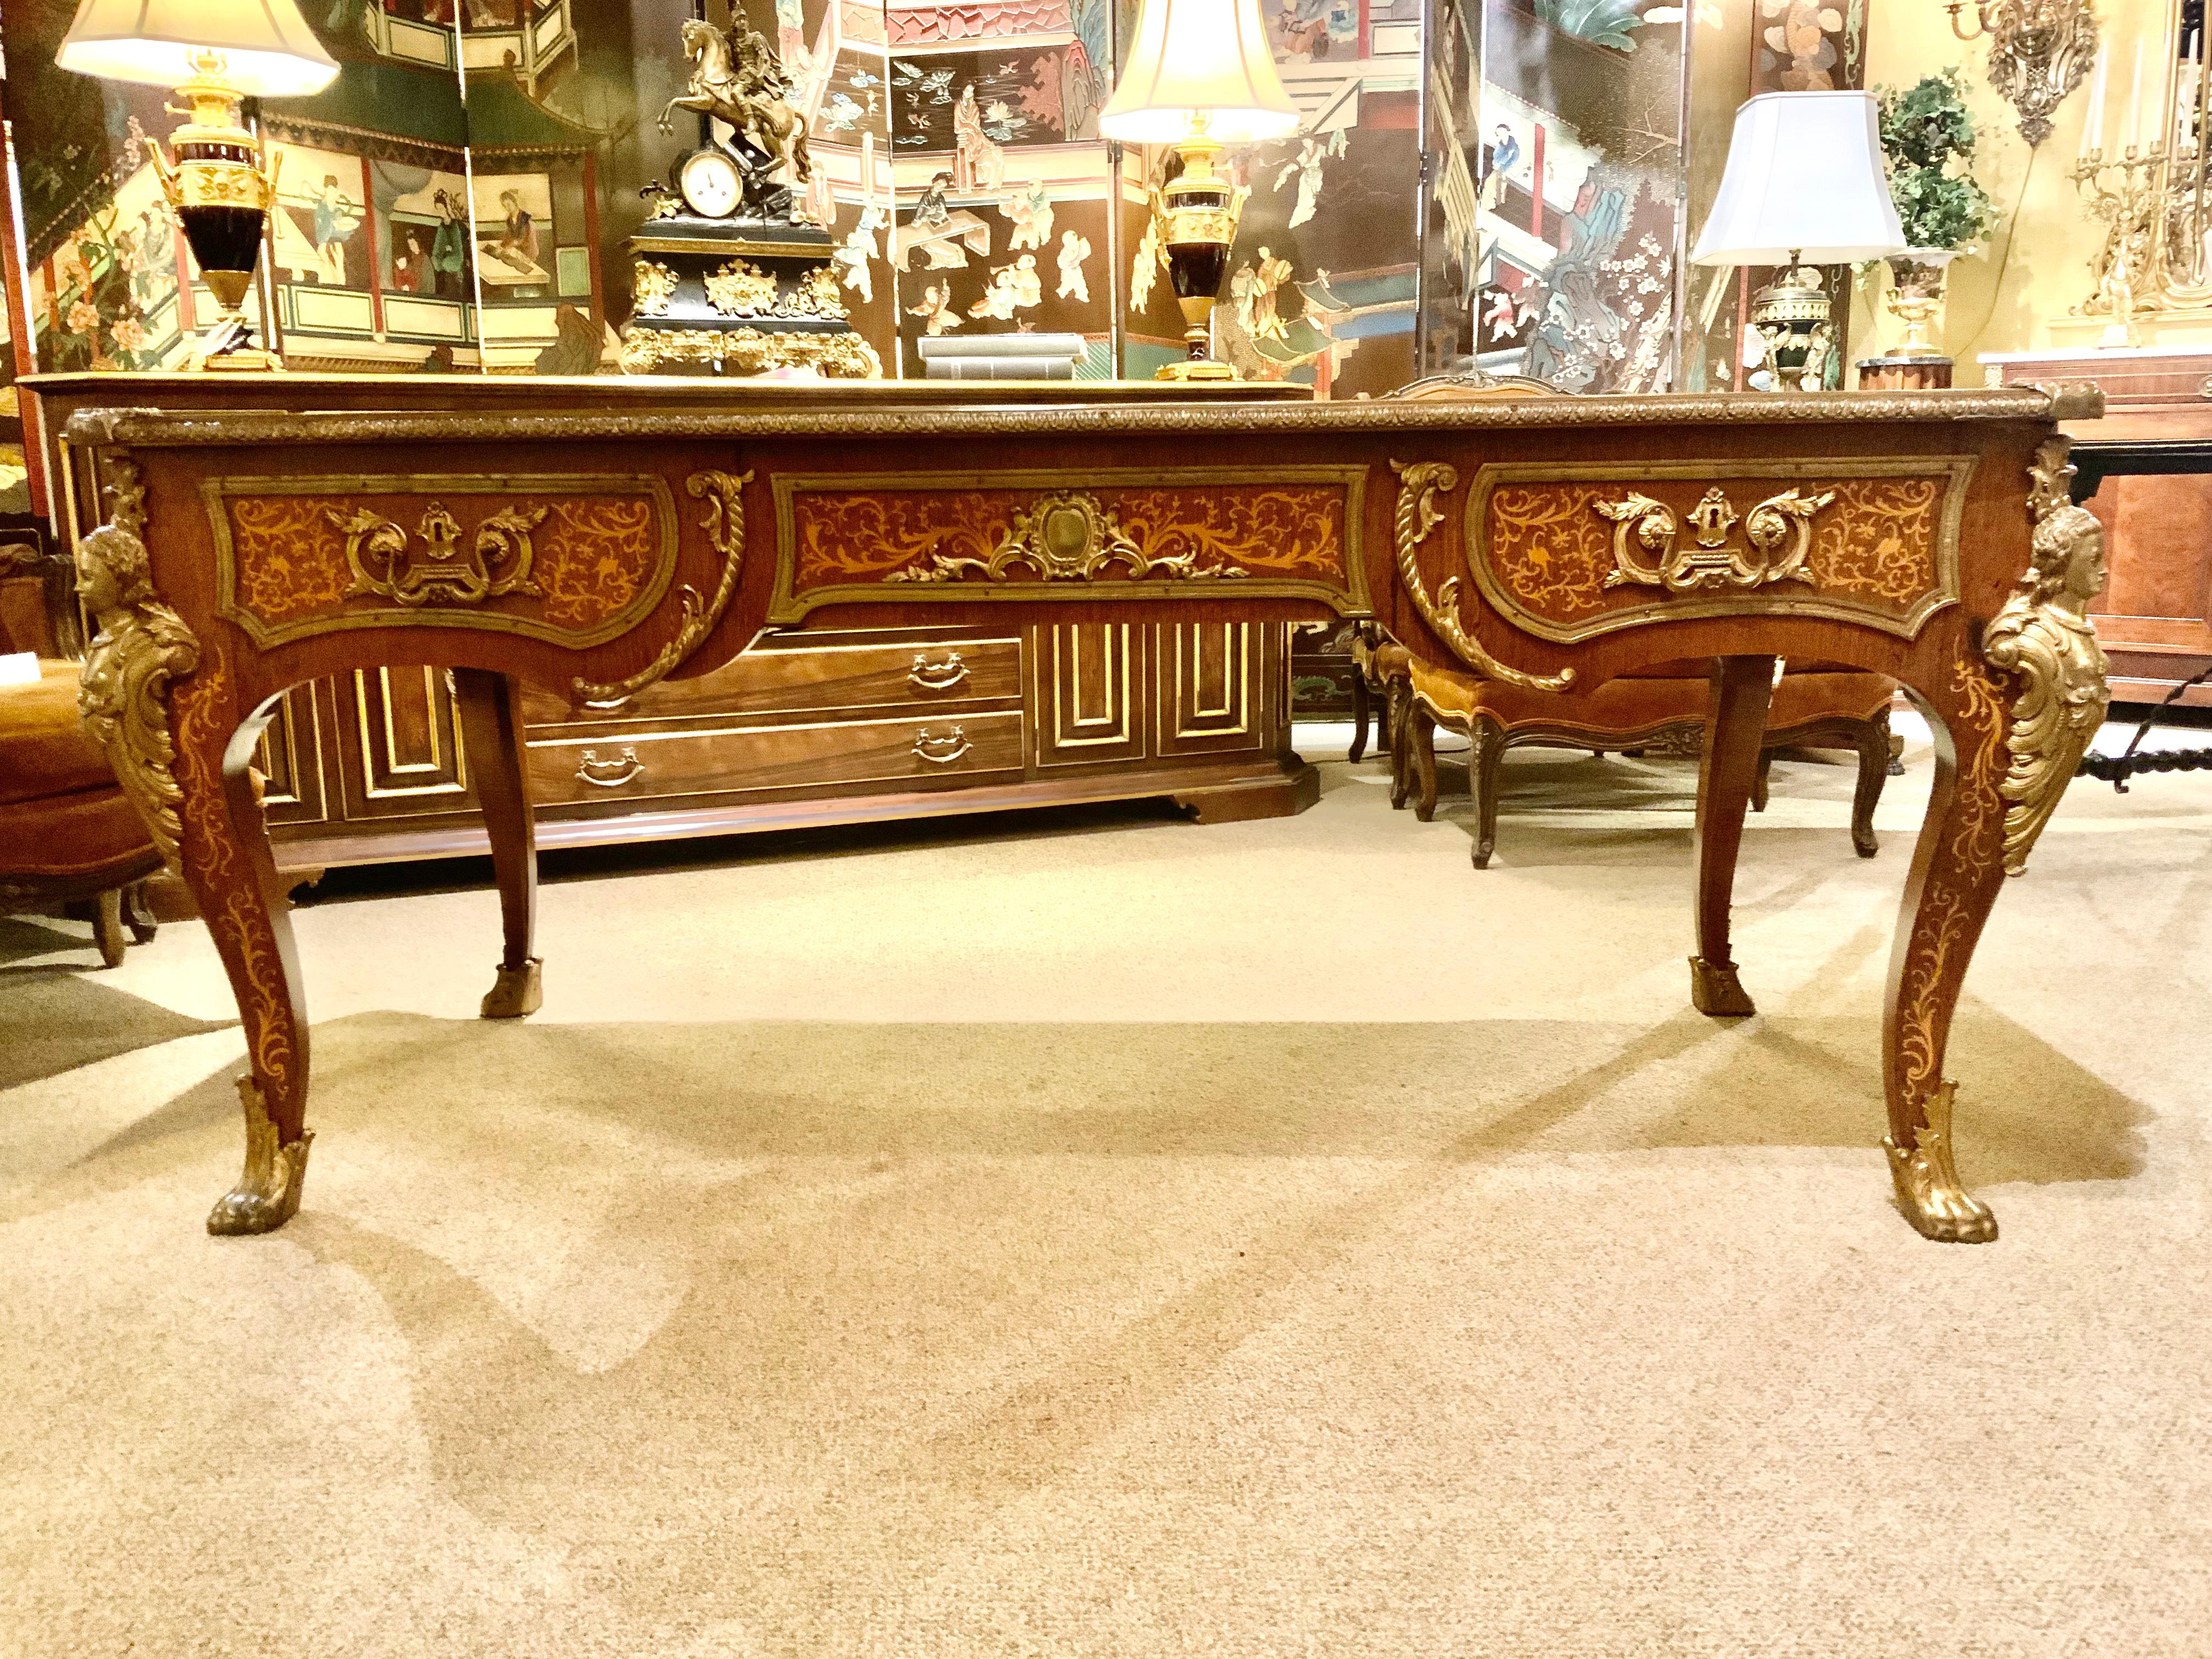 French Bureau Plat 20th C. with Black Gilt Trim Writing Surface In Good Condition For Sale In Houston, TX